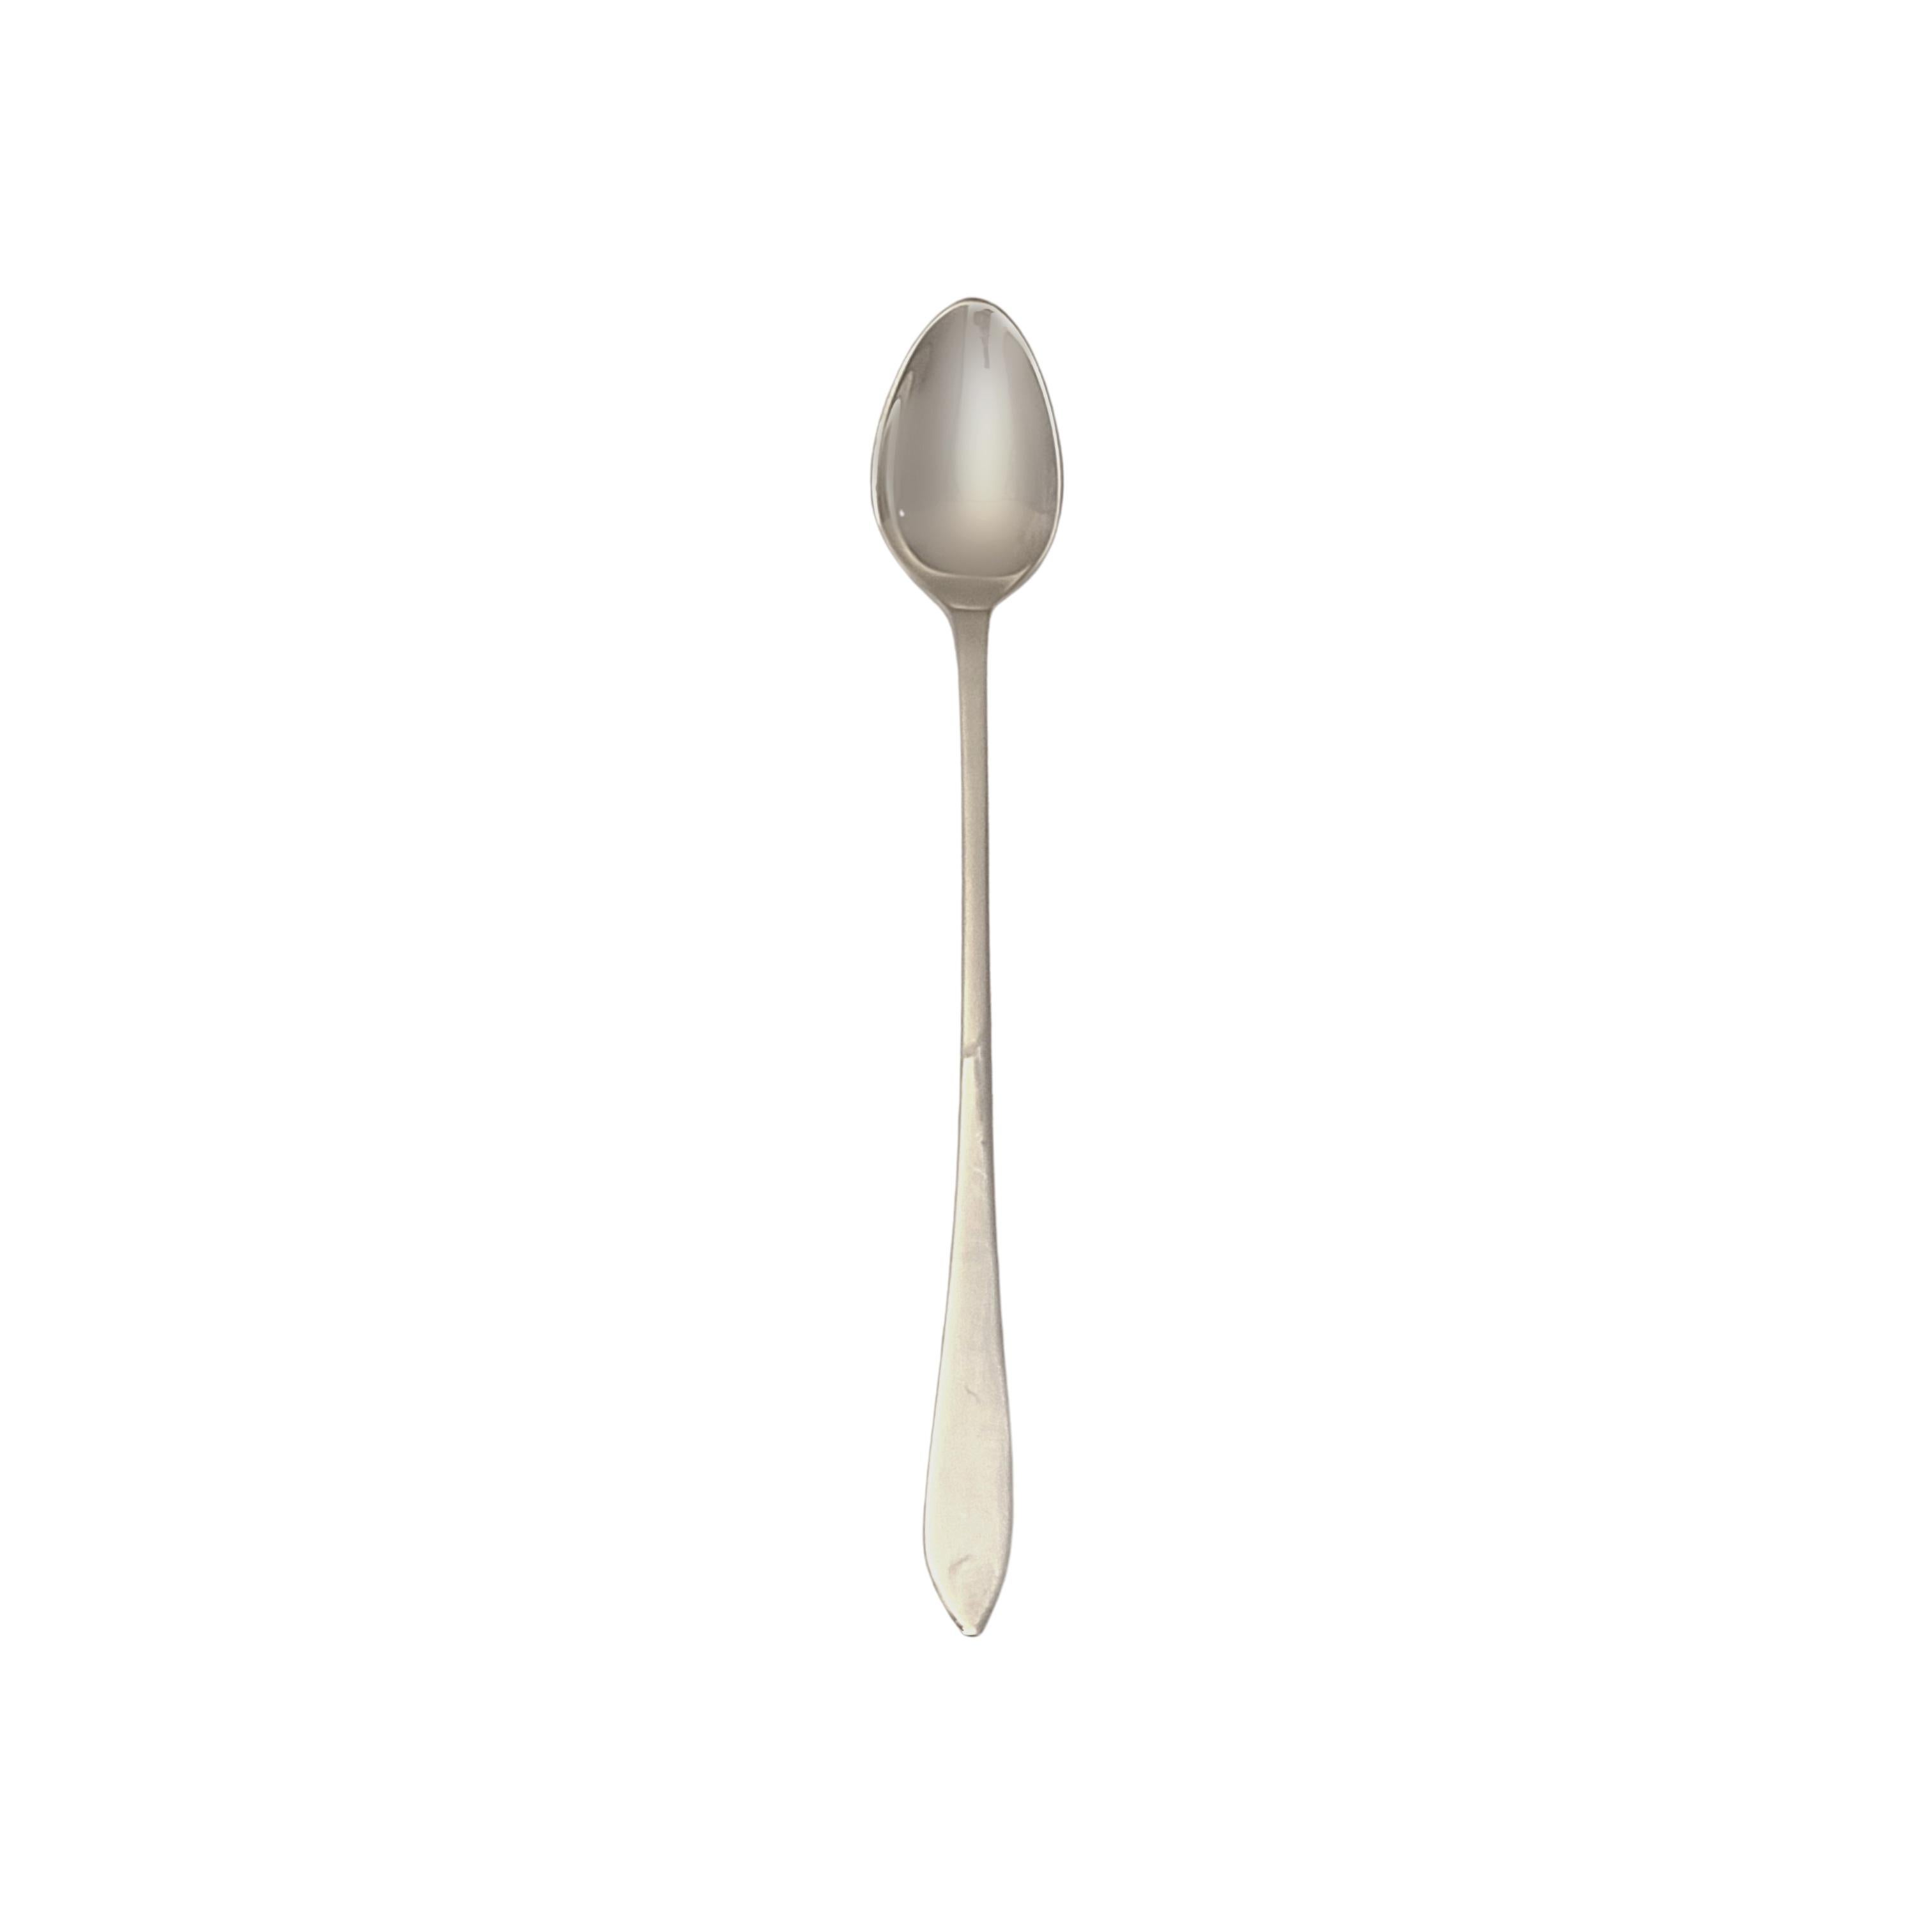 Tiffany & Co sterling silver baby feeding spoon in the Faneuil pattern.

No monogram or engraving.

The Faneuil pattern was in production from 1910-1955 and was named for Faneuil Hall in Boston, MA. The pattern's simple and elegant design makes it a